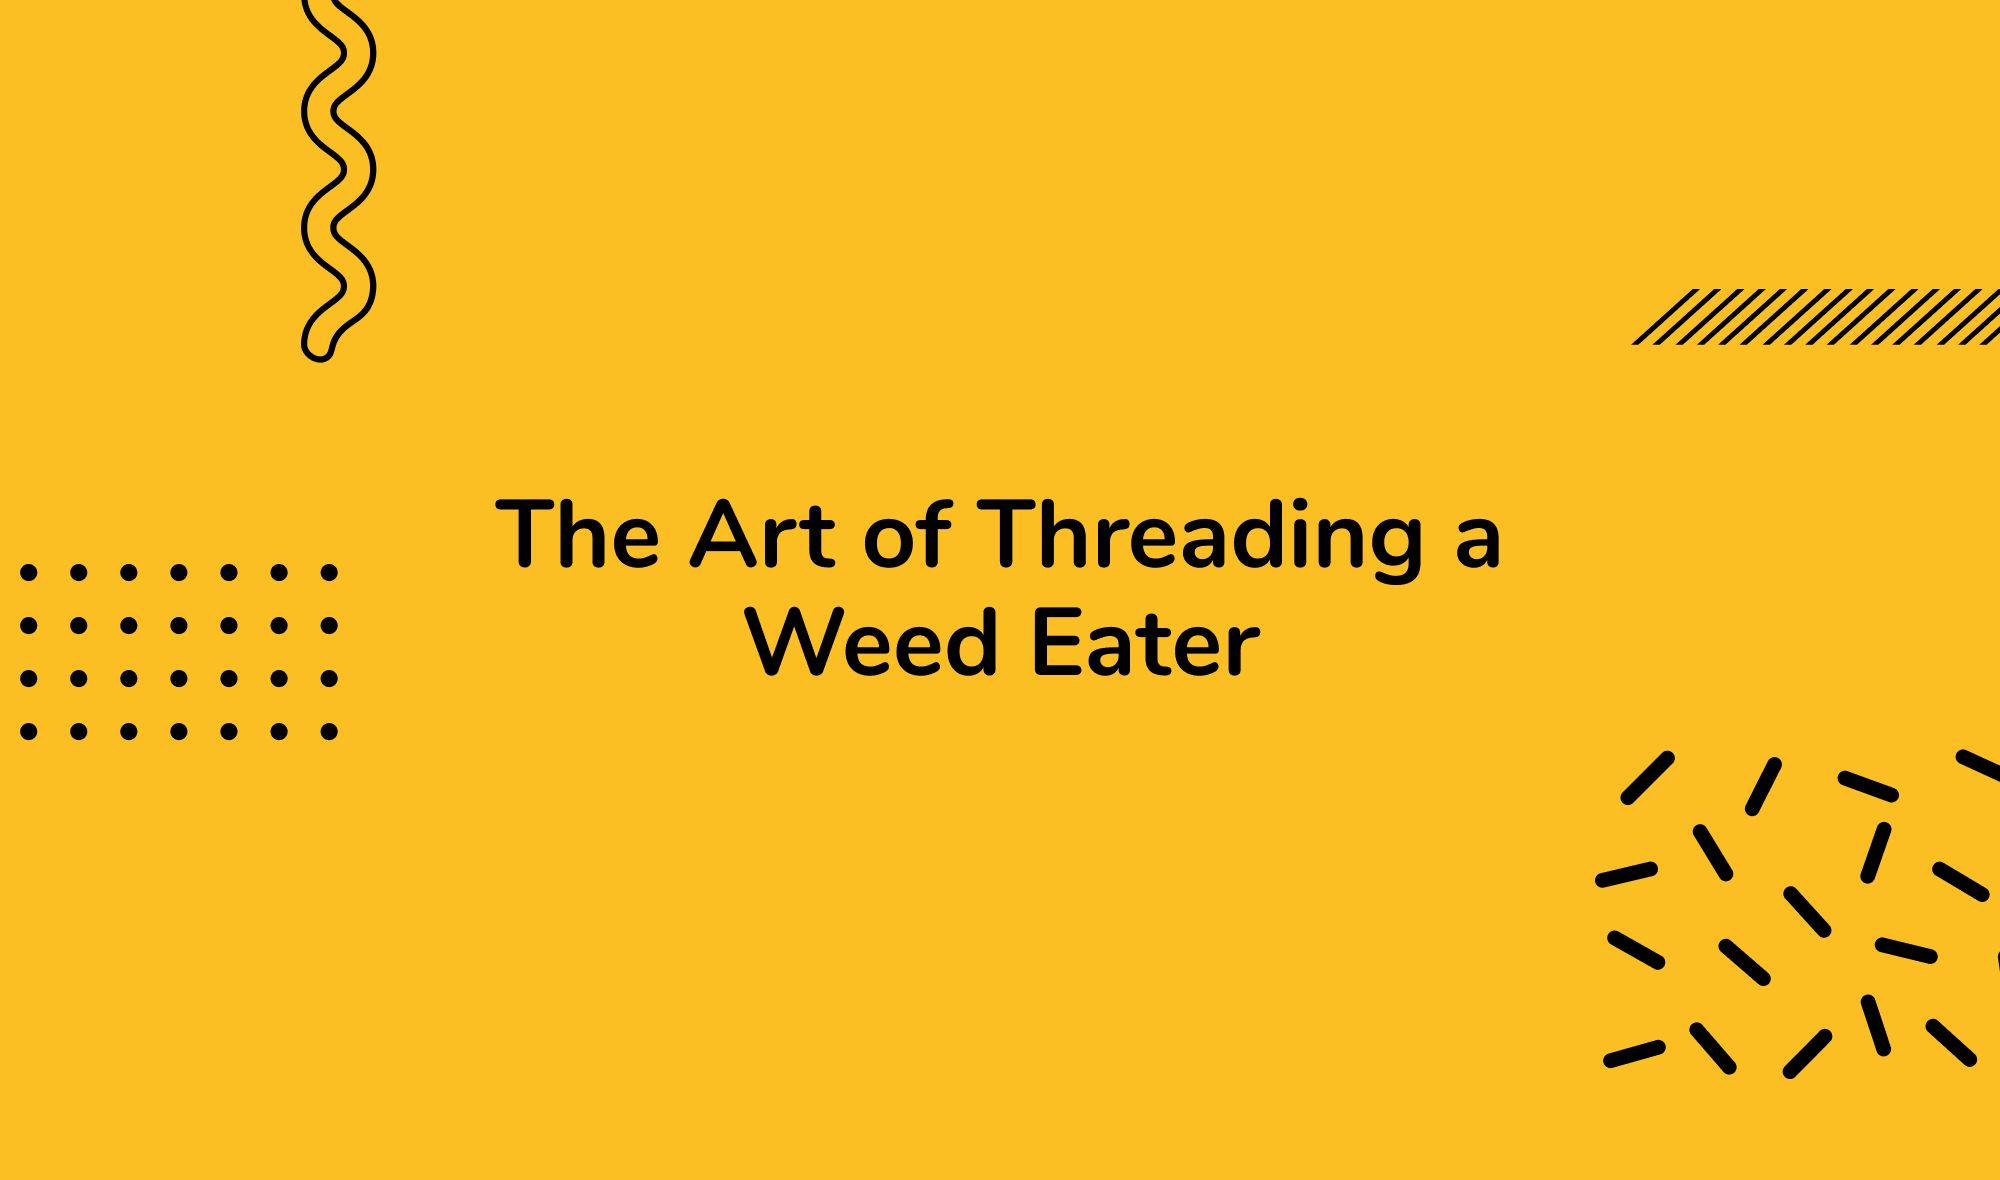 The Art of Threading a Weed Eater